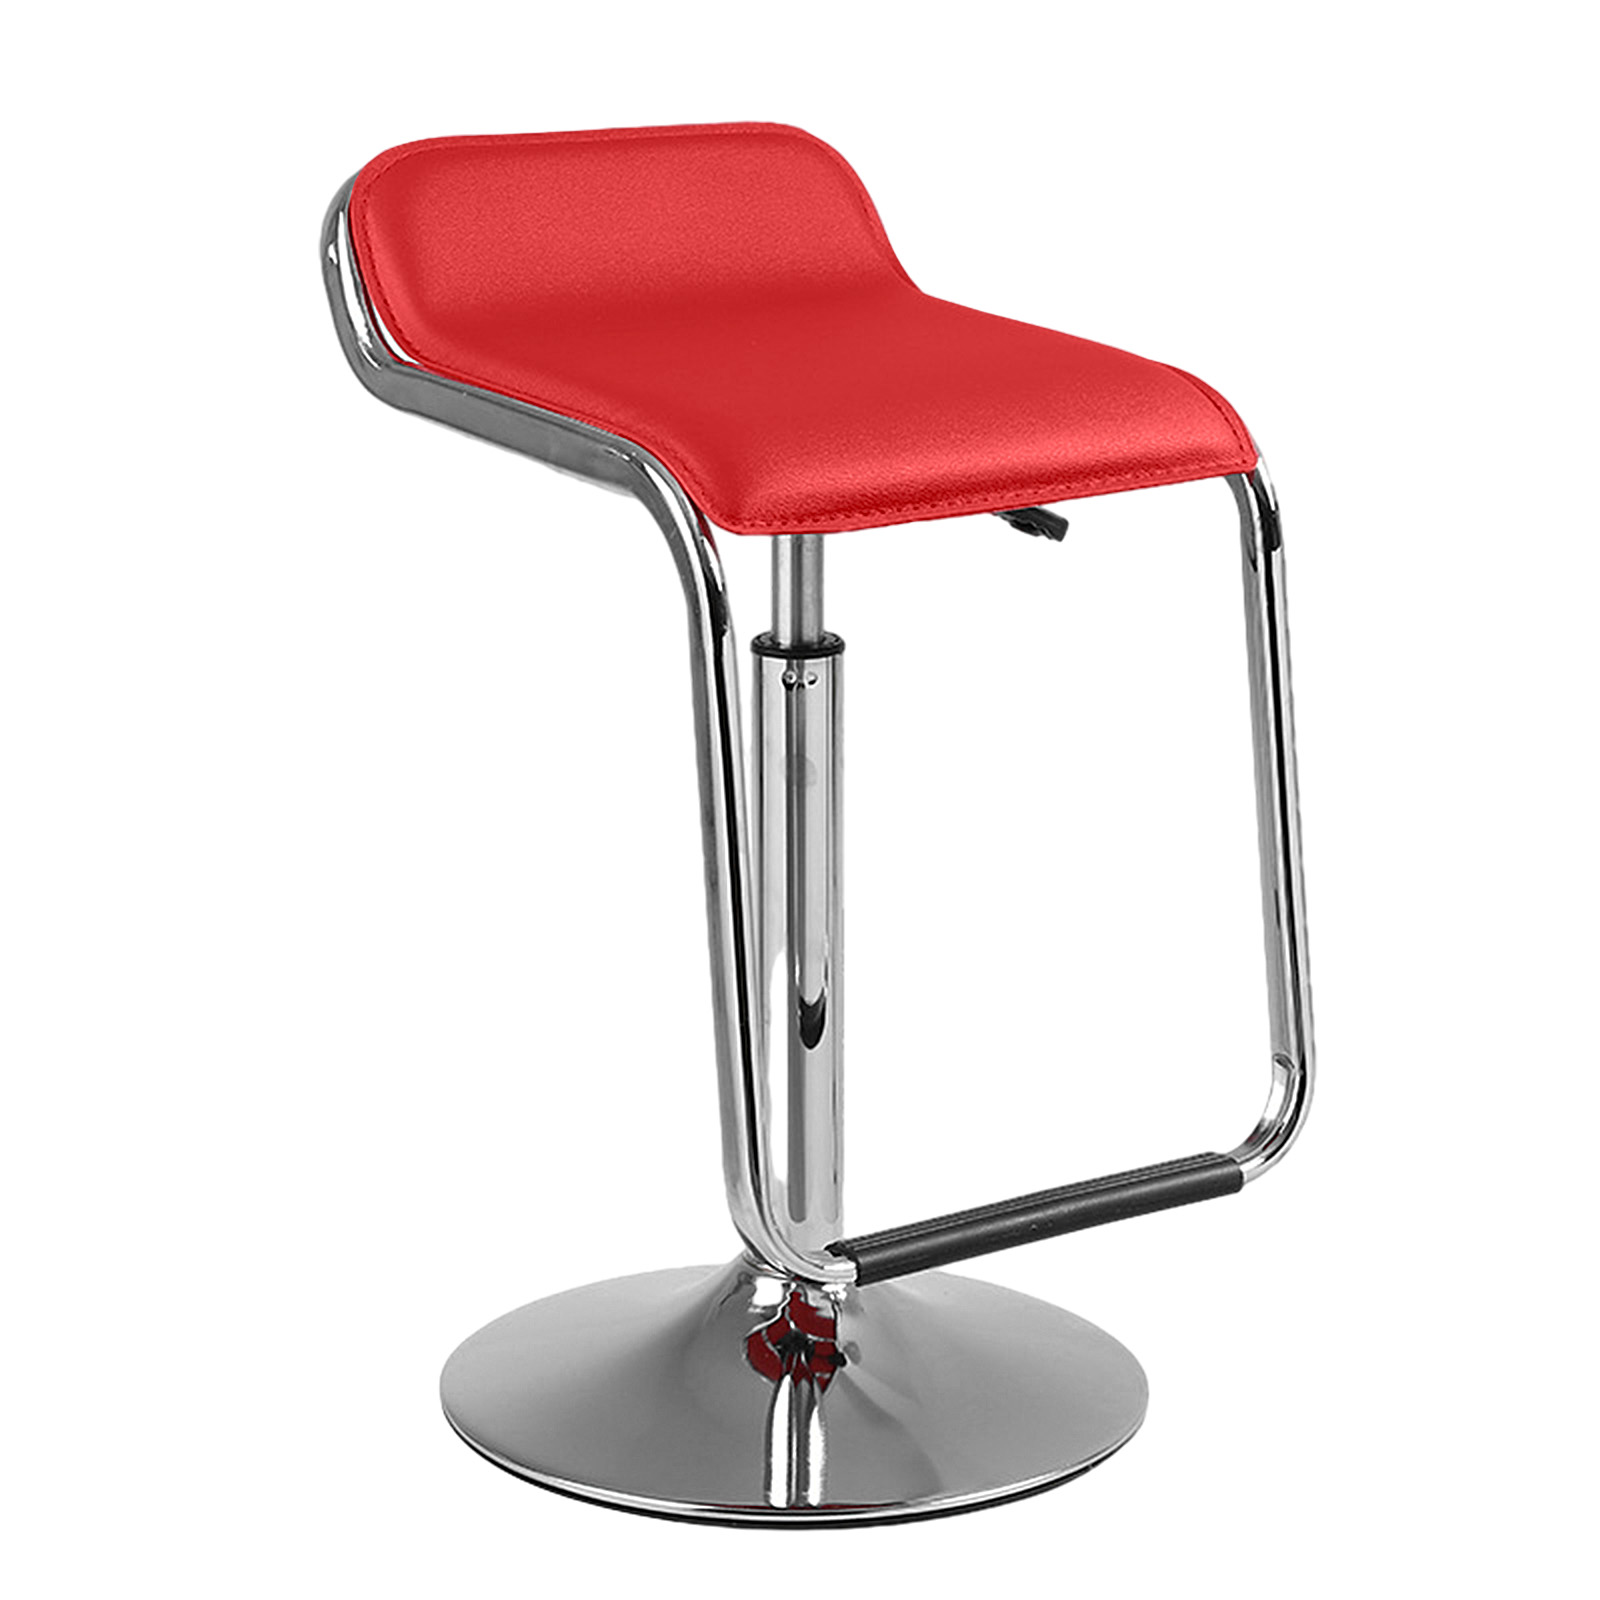 S chair round drag - Red